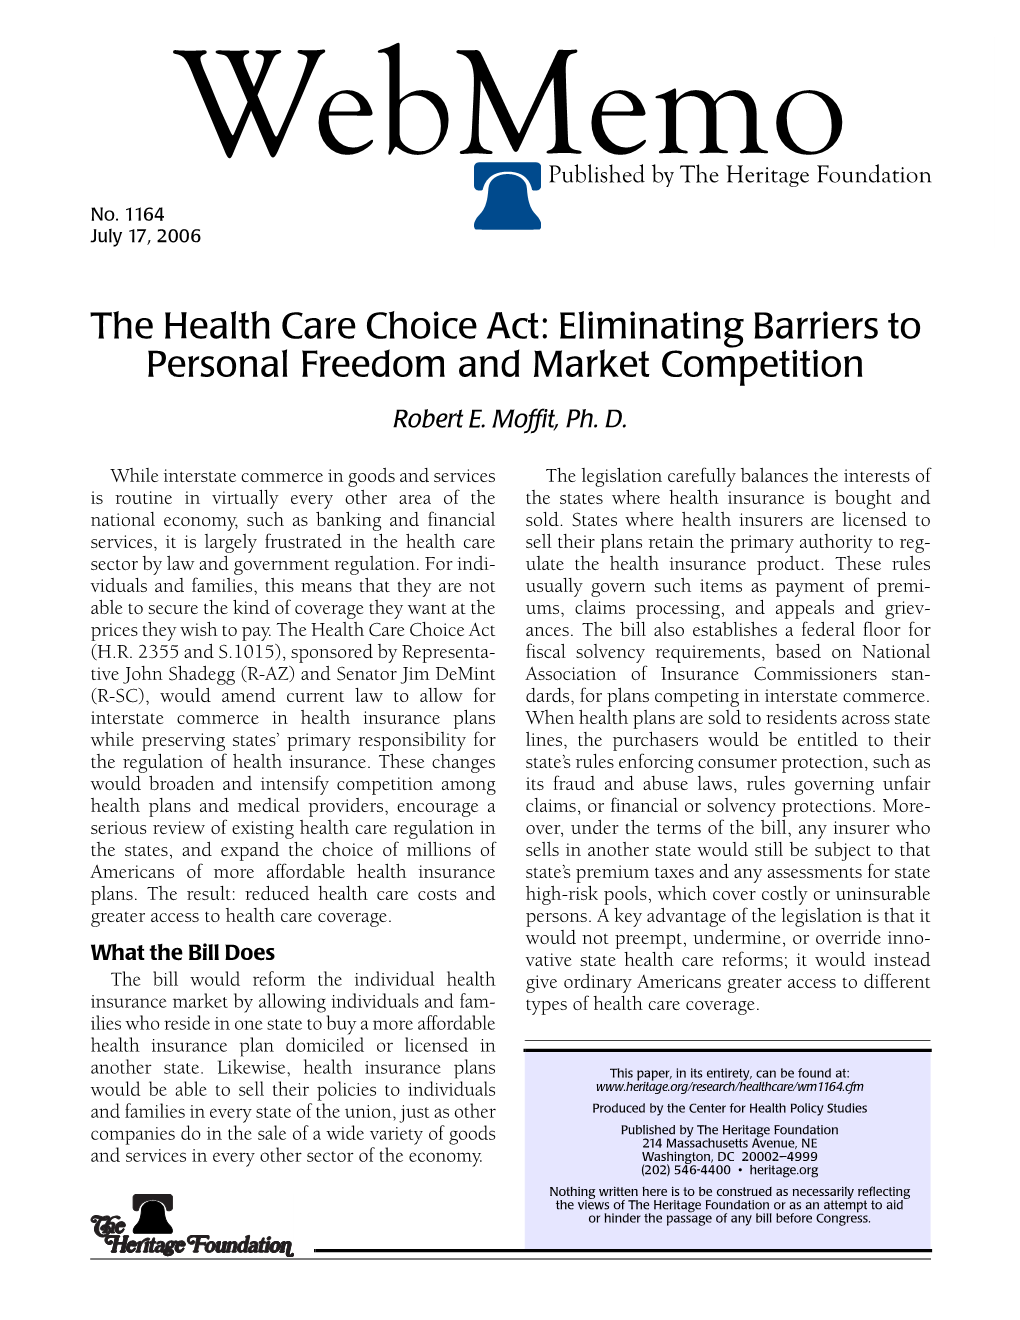 The Health Care Choice Act: Eliminating Barriers to Personal Freedom and Market Competition Robert E